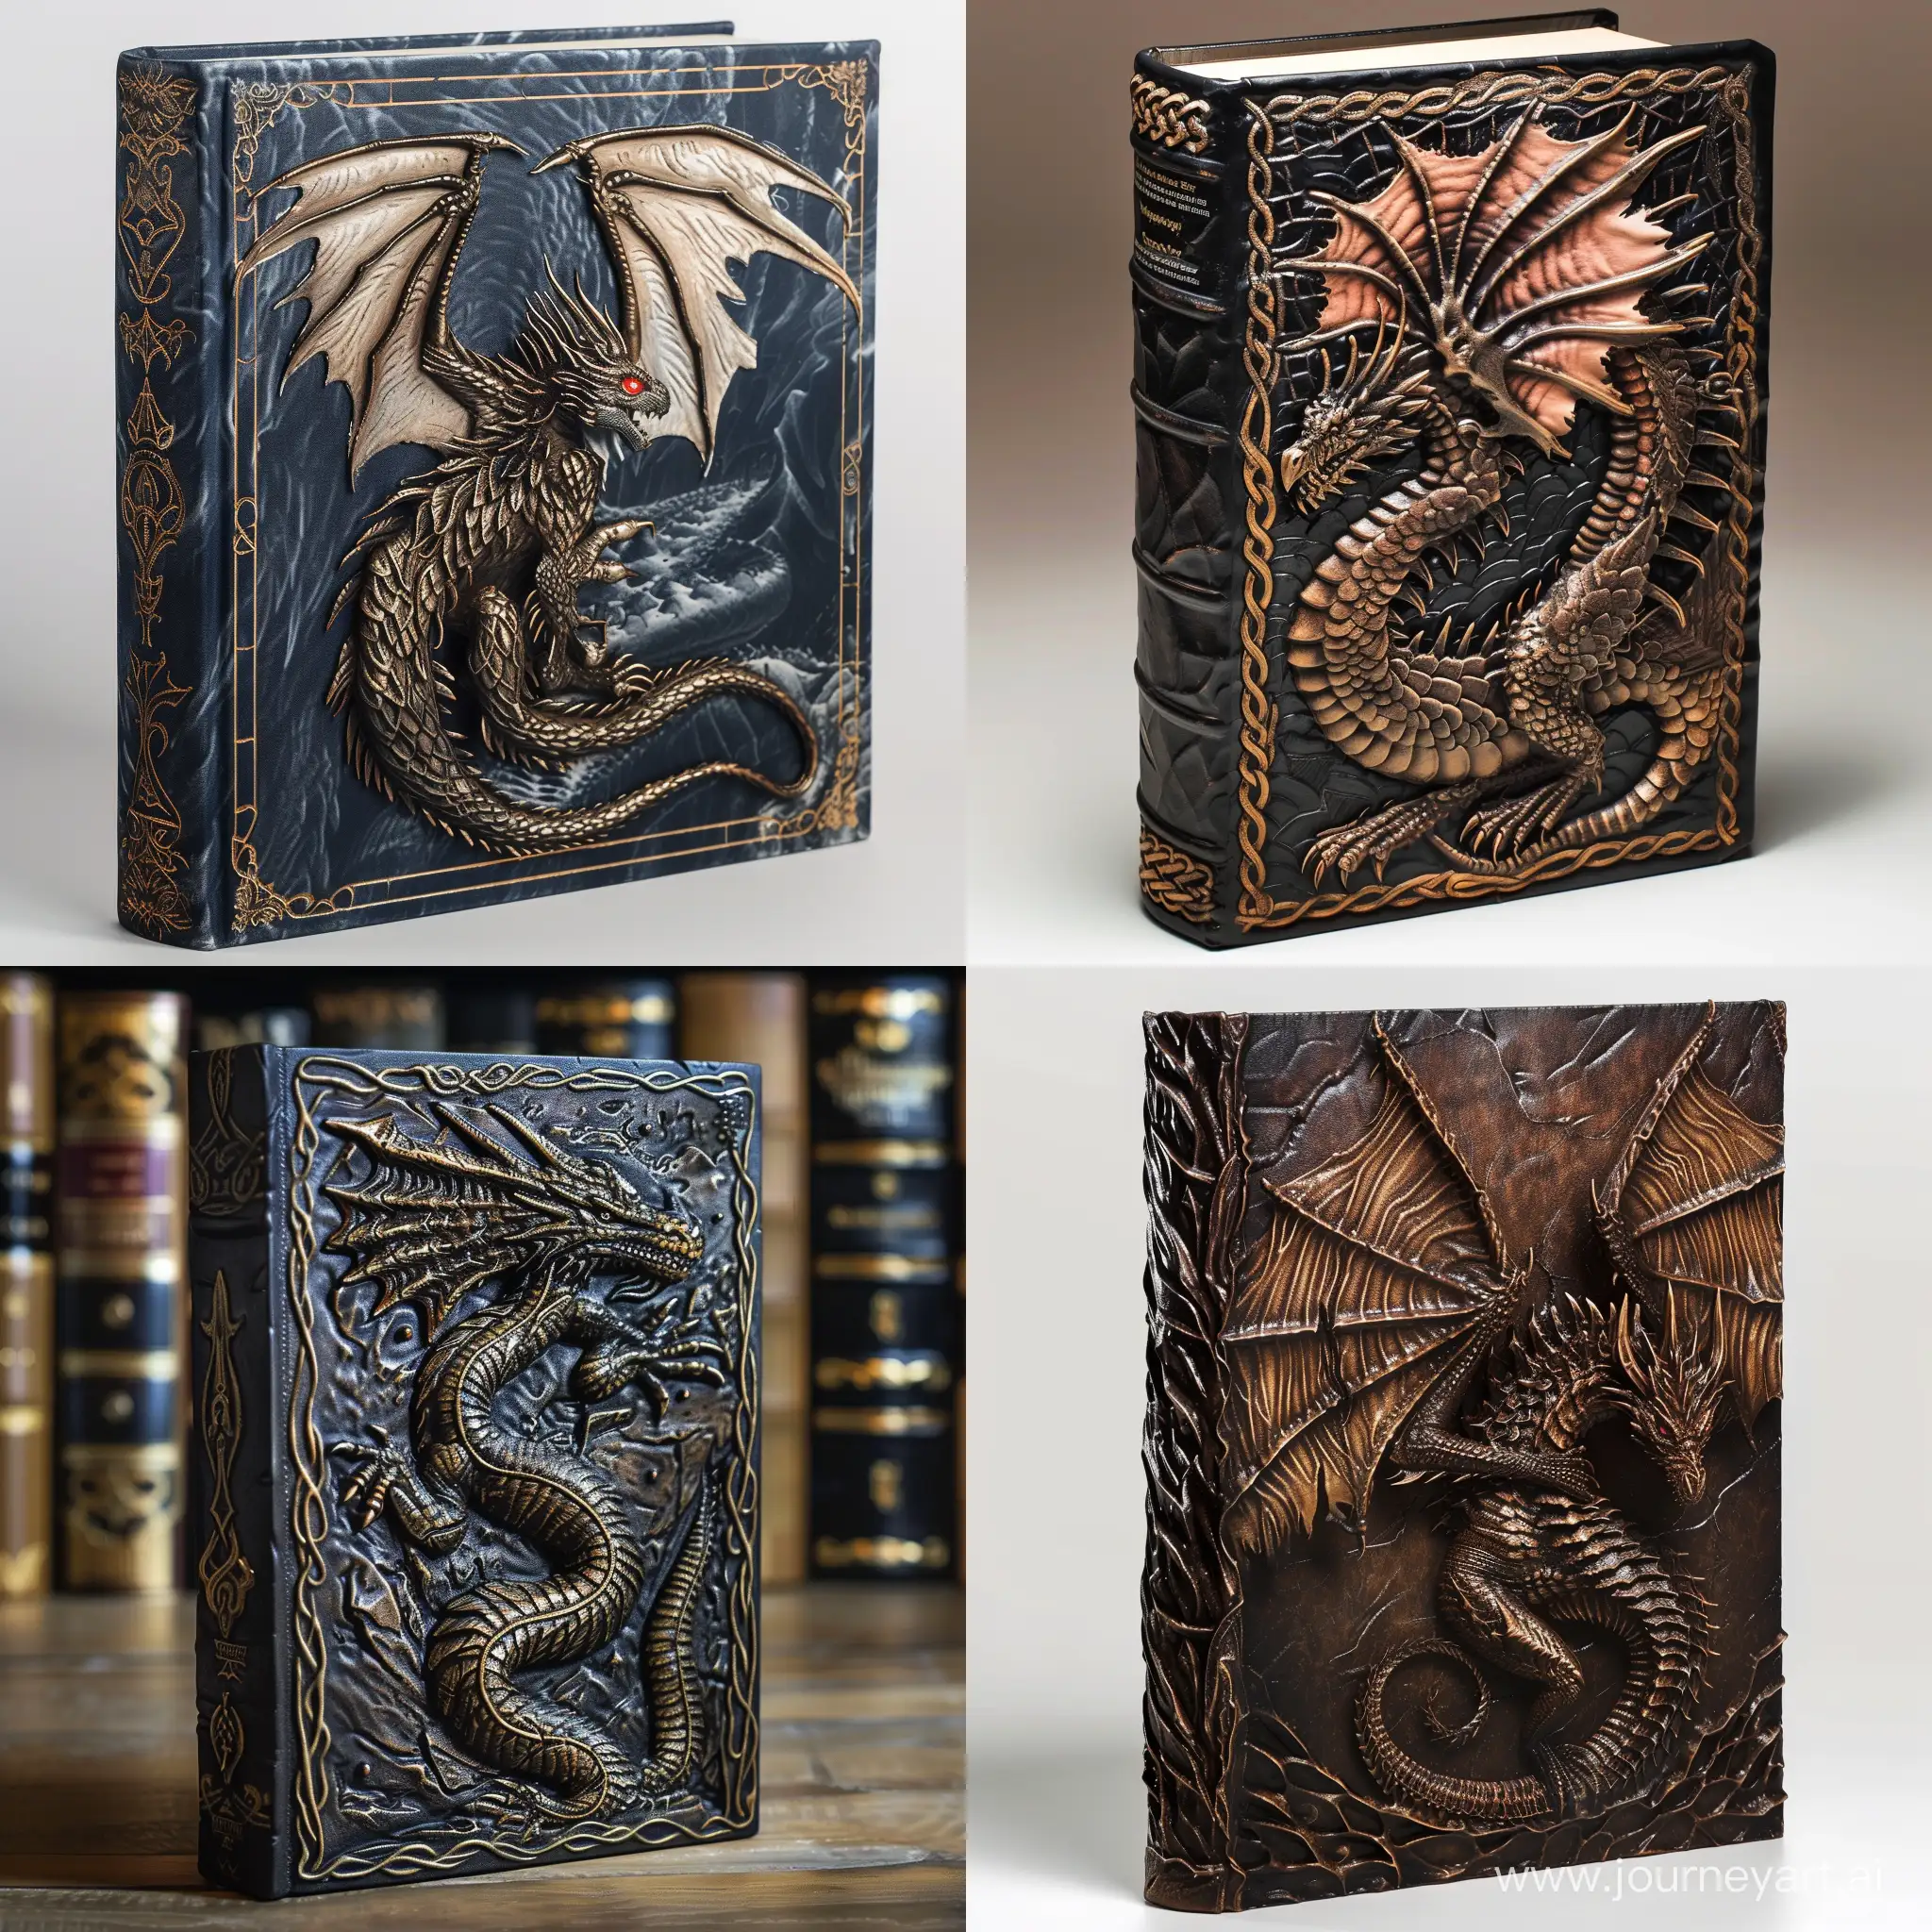 skin book cover with a wyrm depicted on it a dark fantasy style